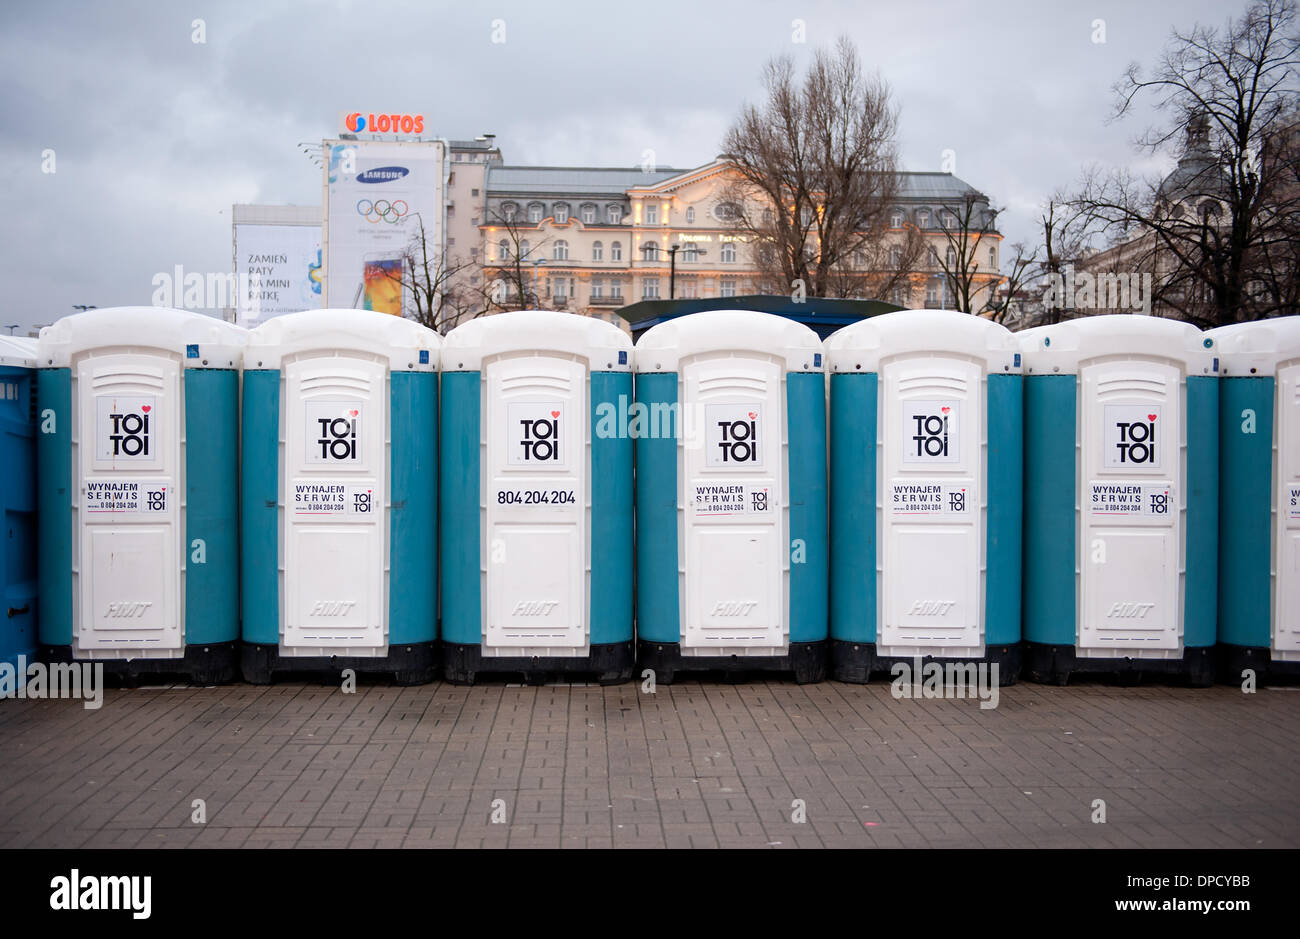 Toi Toi Toilets High Resolution Stock Photography and Images - Alamy